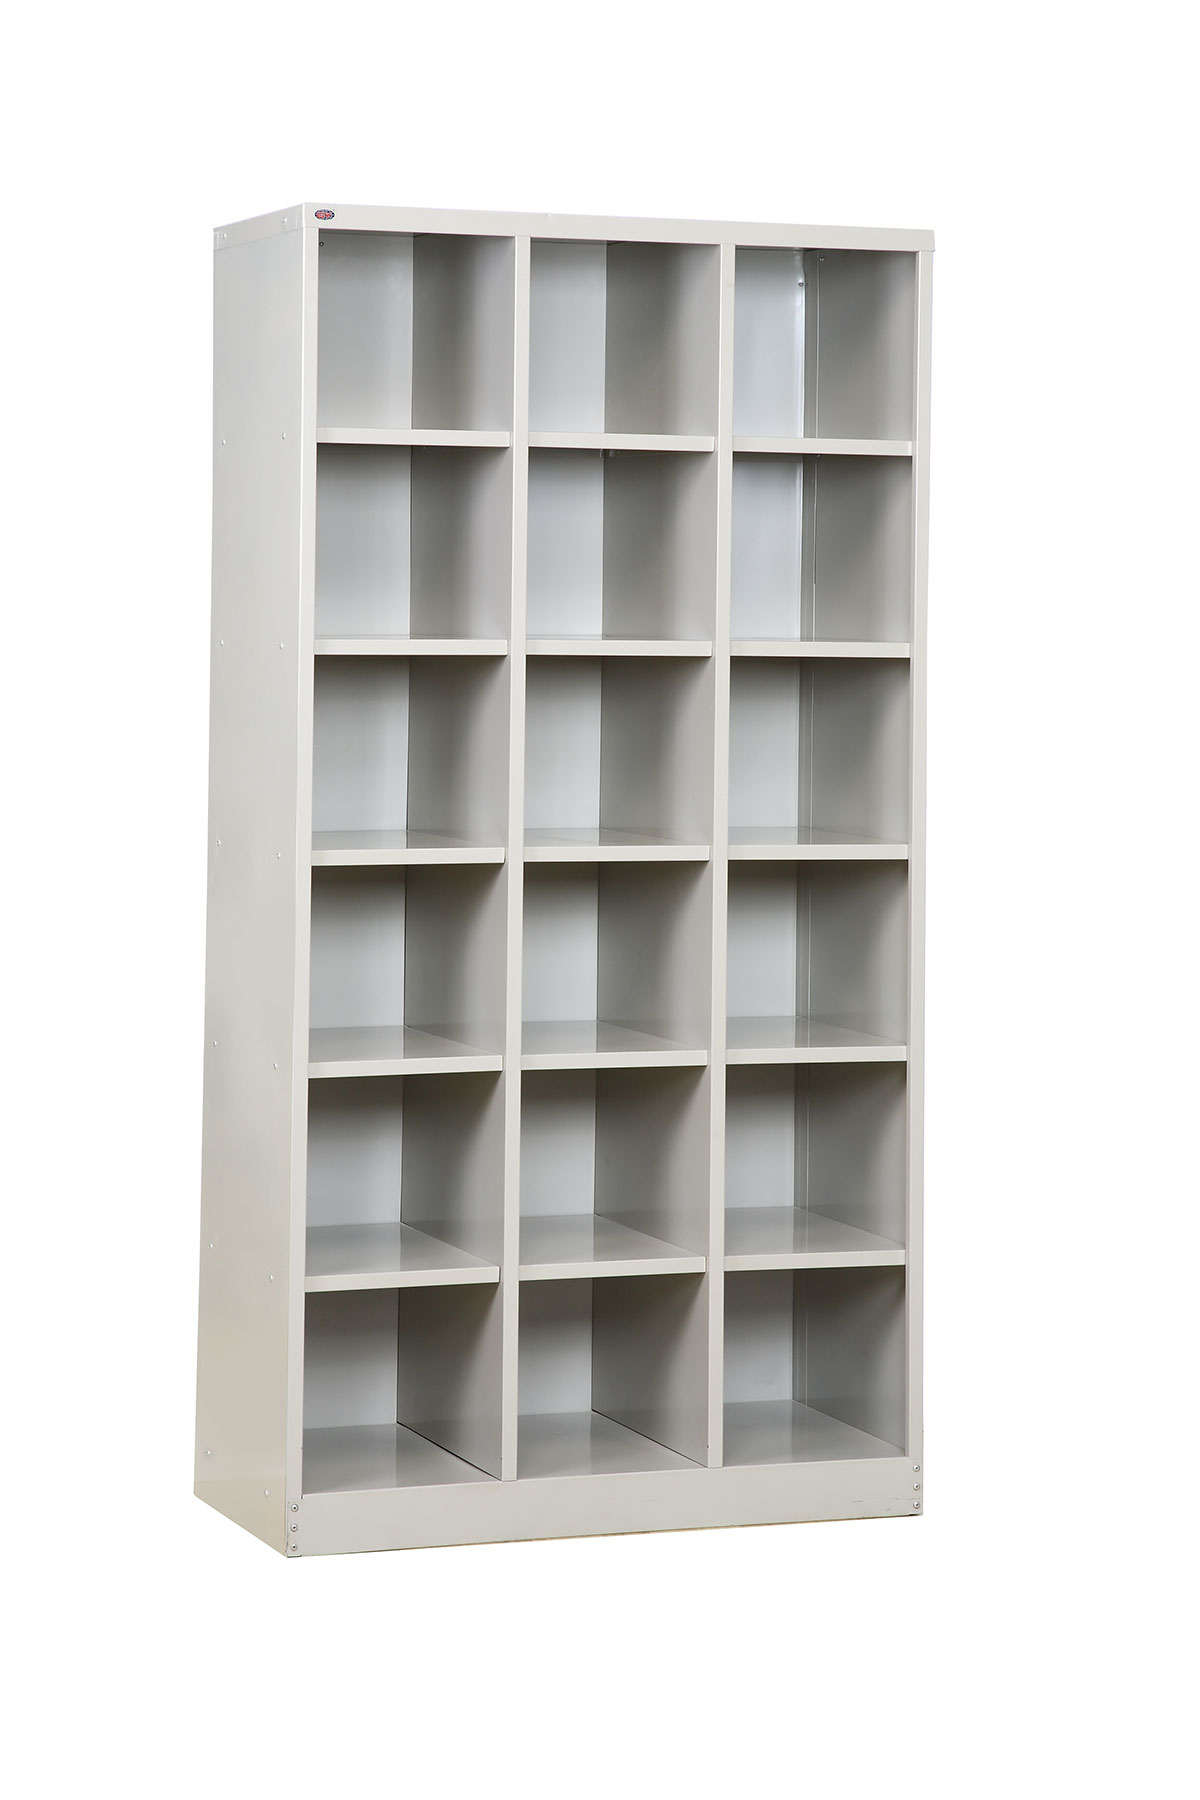 GY406 18 PIGEON HOLES CABINET